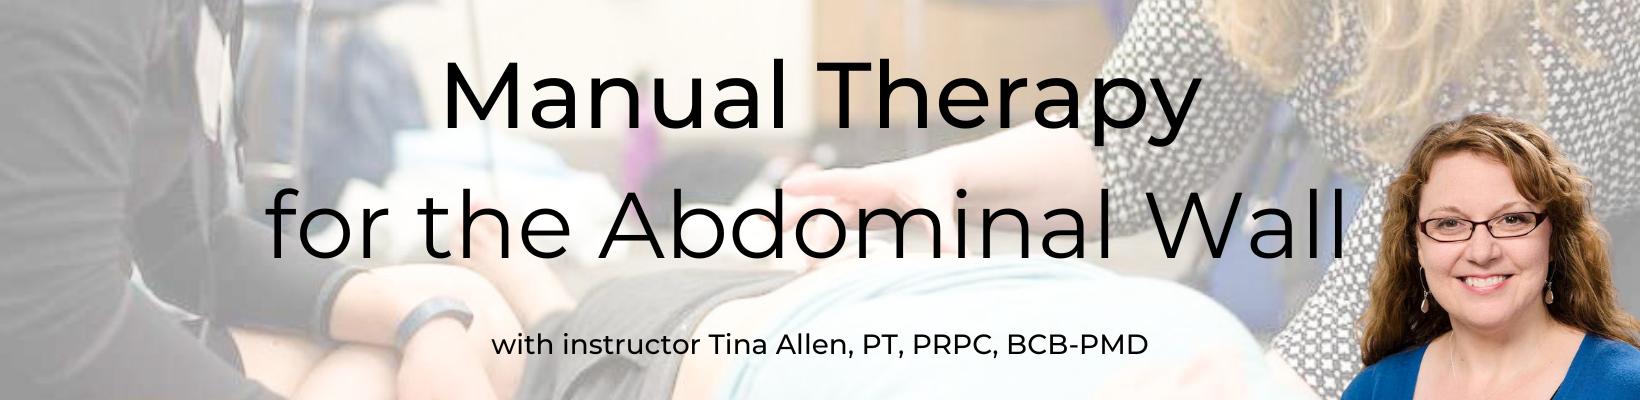 Manual Therapy for the Abdominal Wall